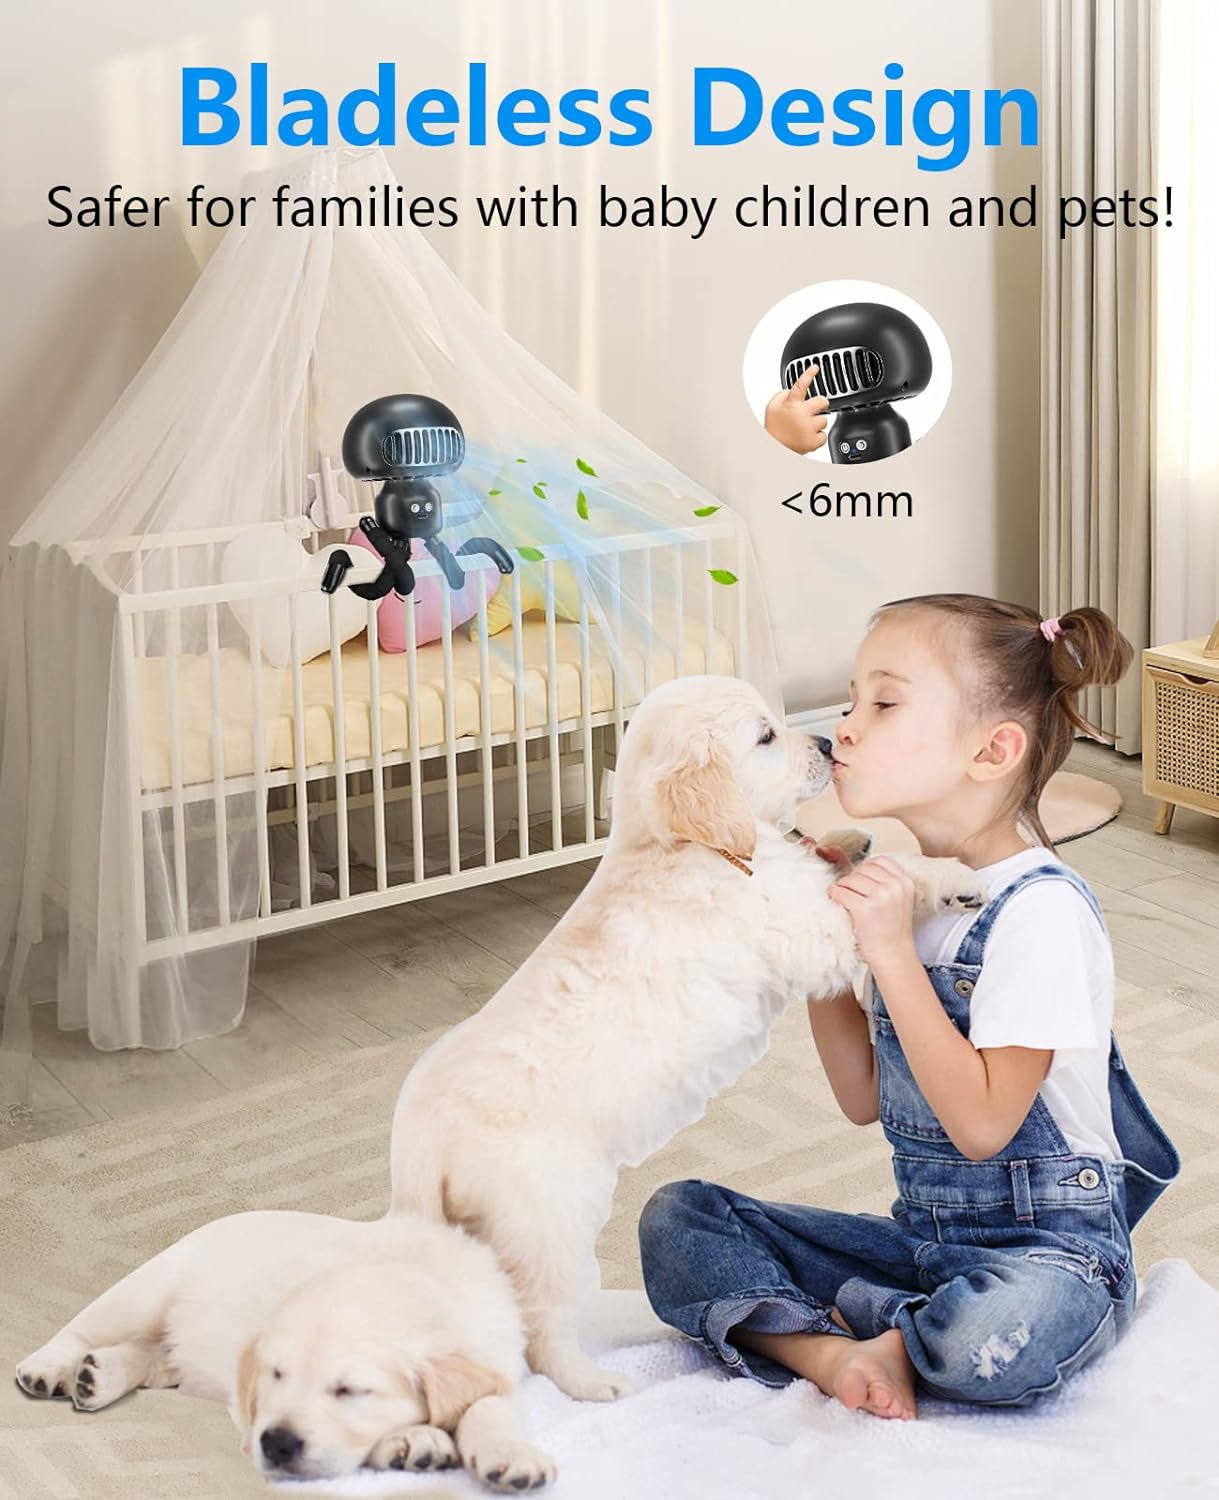 TAECCL Stroller Fan Clip On for Baby, Small Bladeless Fan 90° Oscillating Portable Fan, 4000mAh USB Rechargeable Fan Battery Operated Baby Fan for Stroller and Car Seat, Crib, Beach, Bike, Travel